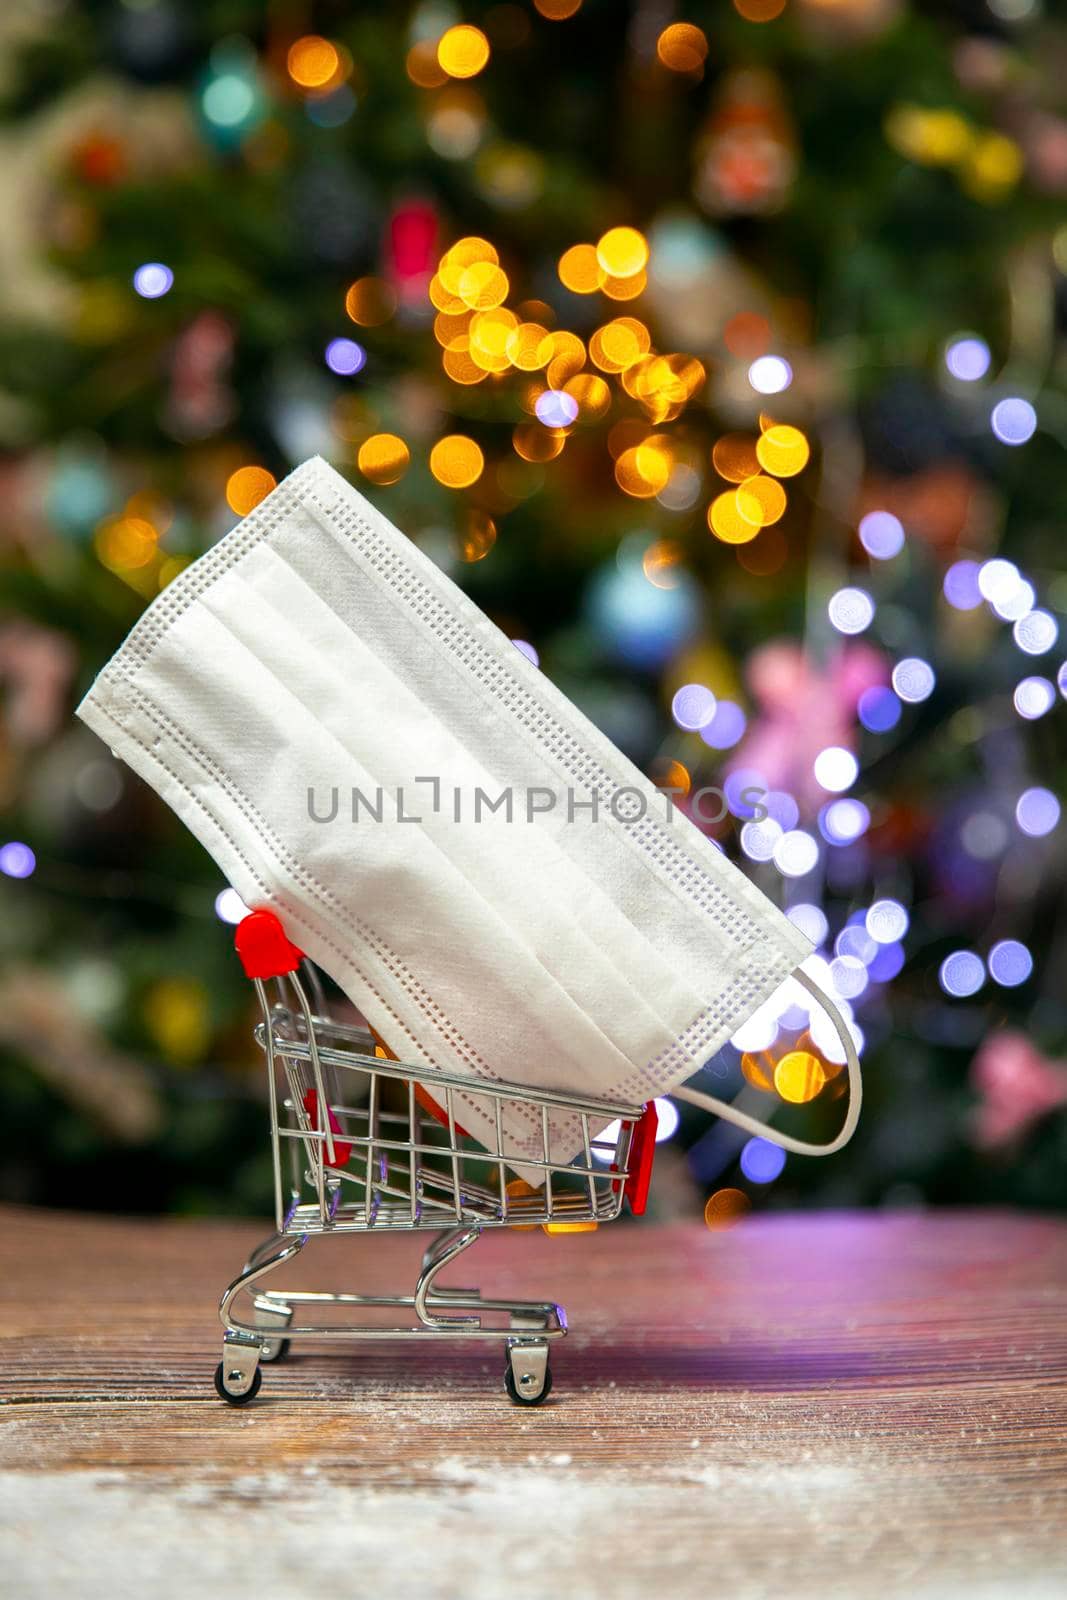 Protective safety mask in iron shopping basket near Christmas tree, Covid-19, coronavirus, holiday concept with copy space and bokeh lights background by Annebel146